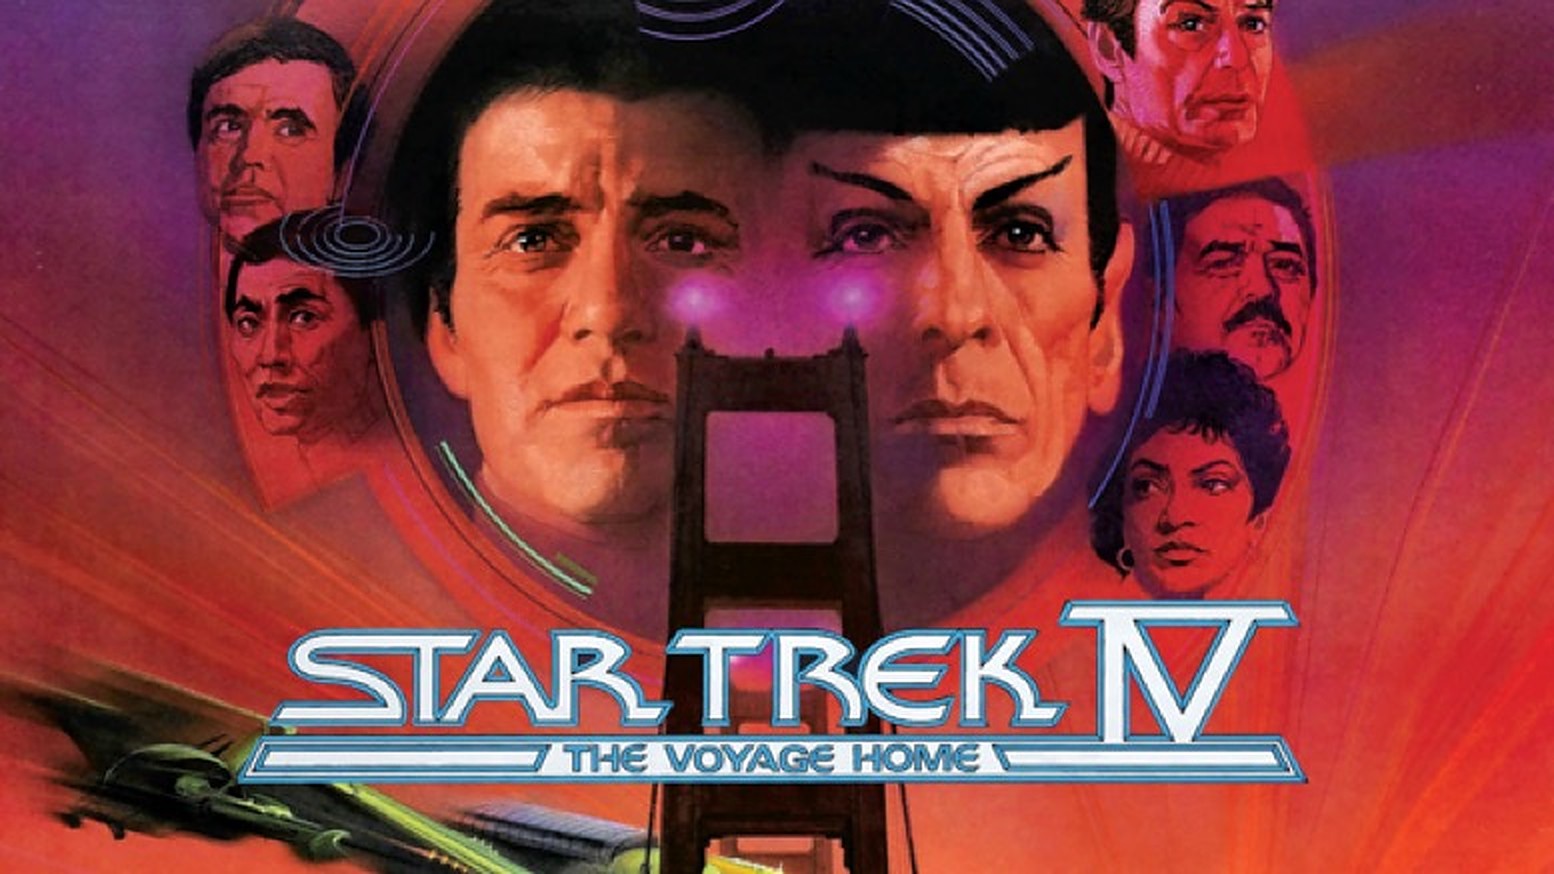 45 Facts about the movie Star Trek IV: The Voyage Home - Facts.net